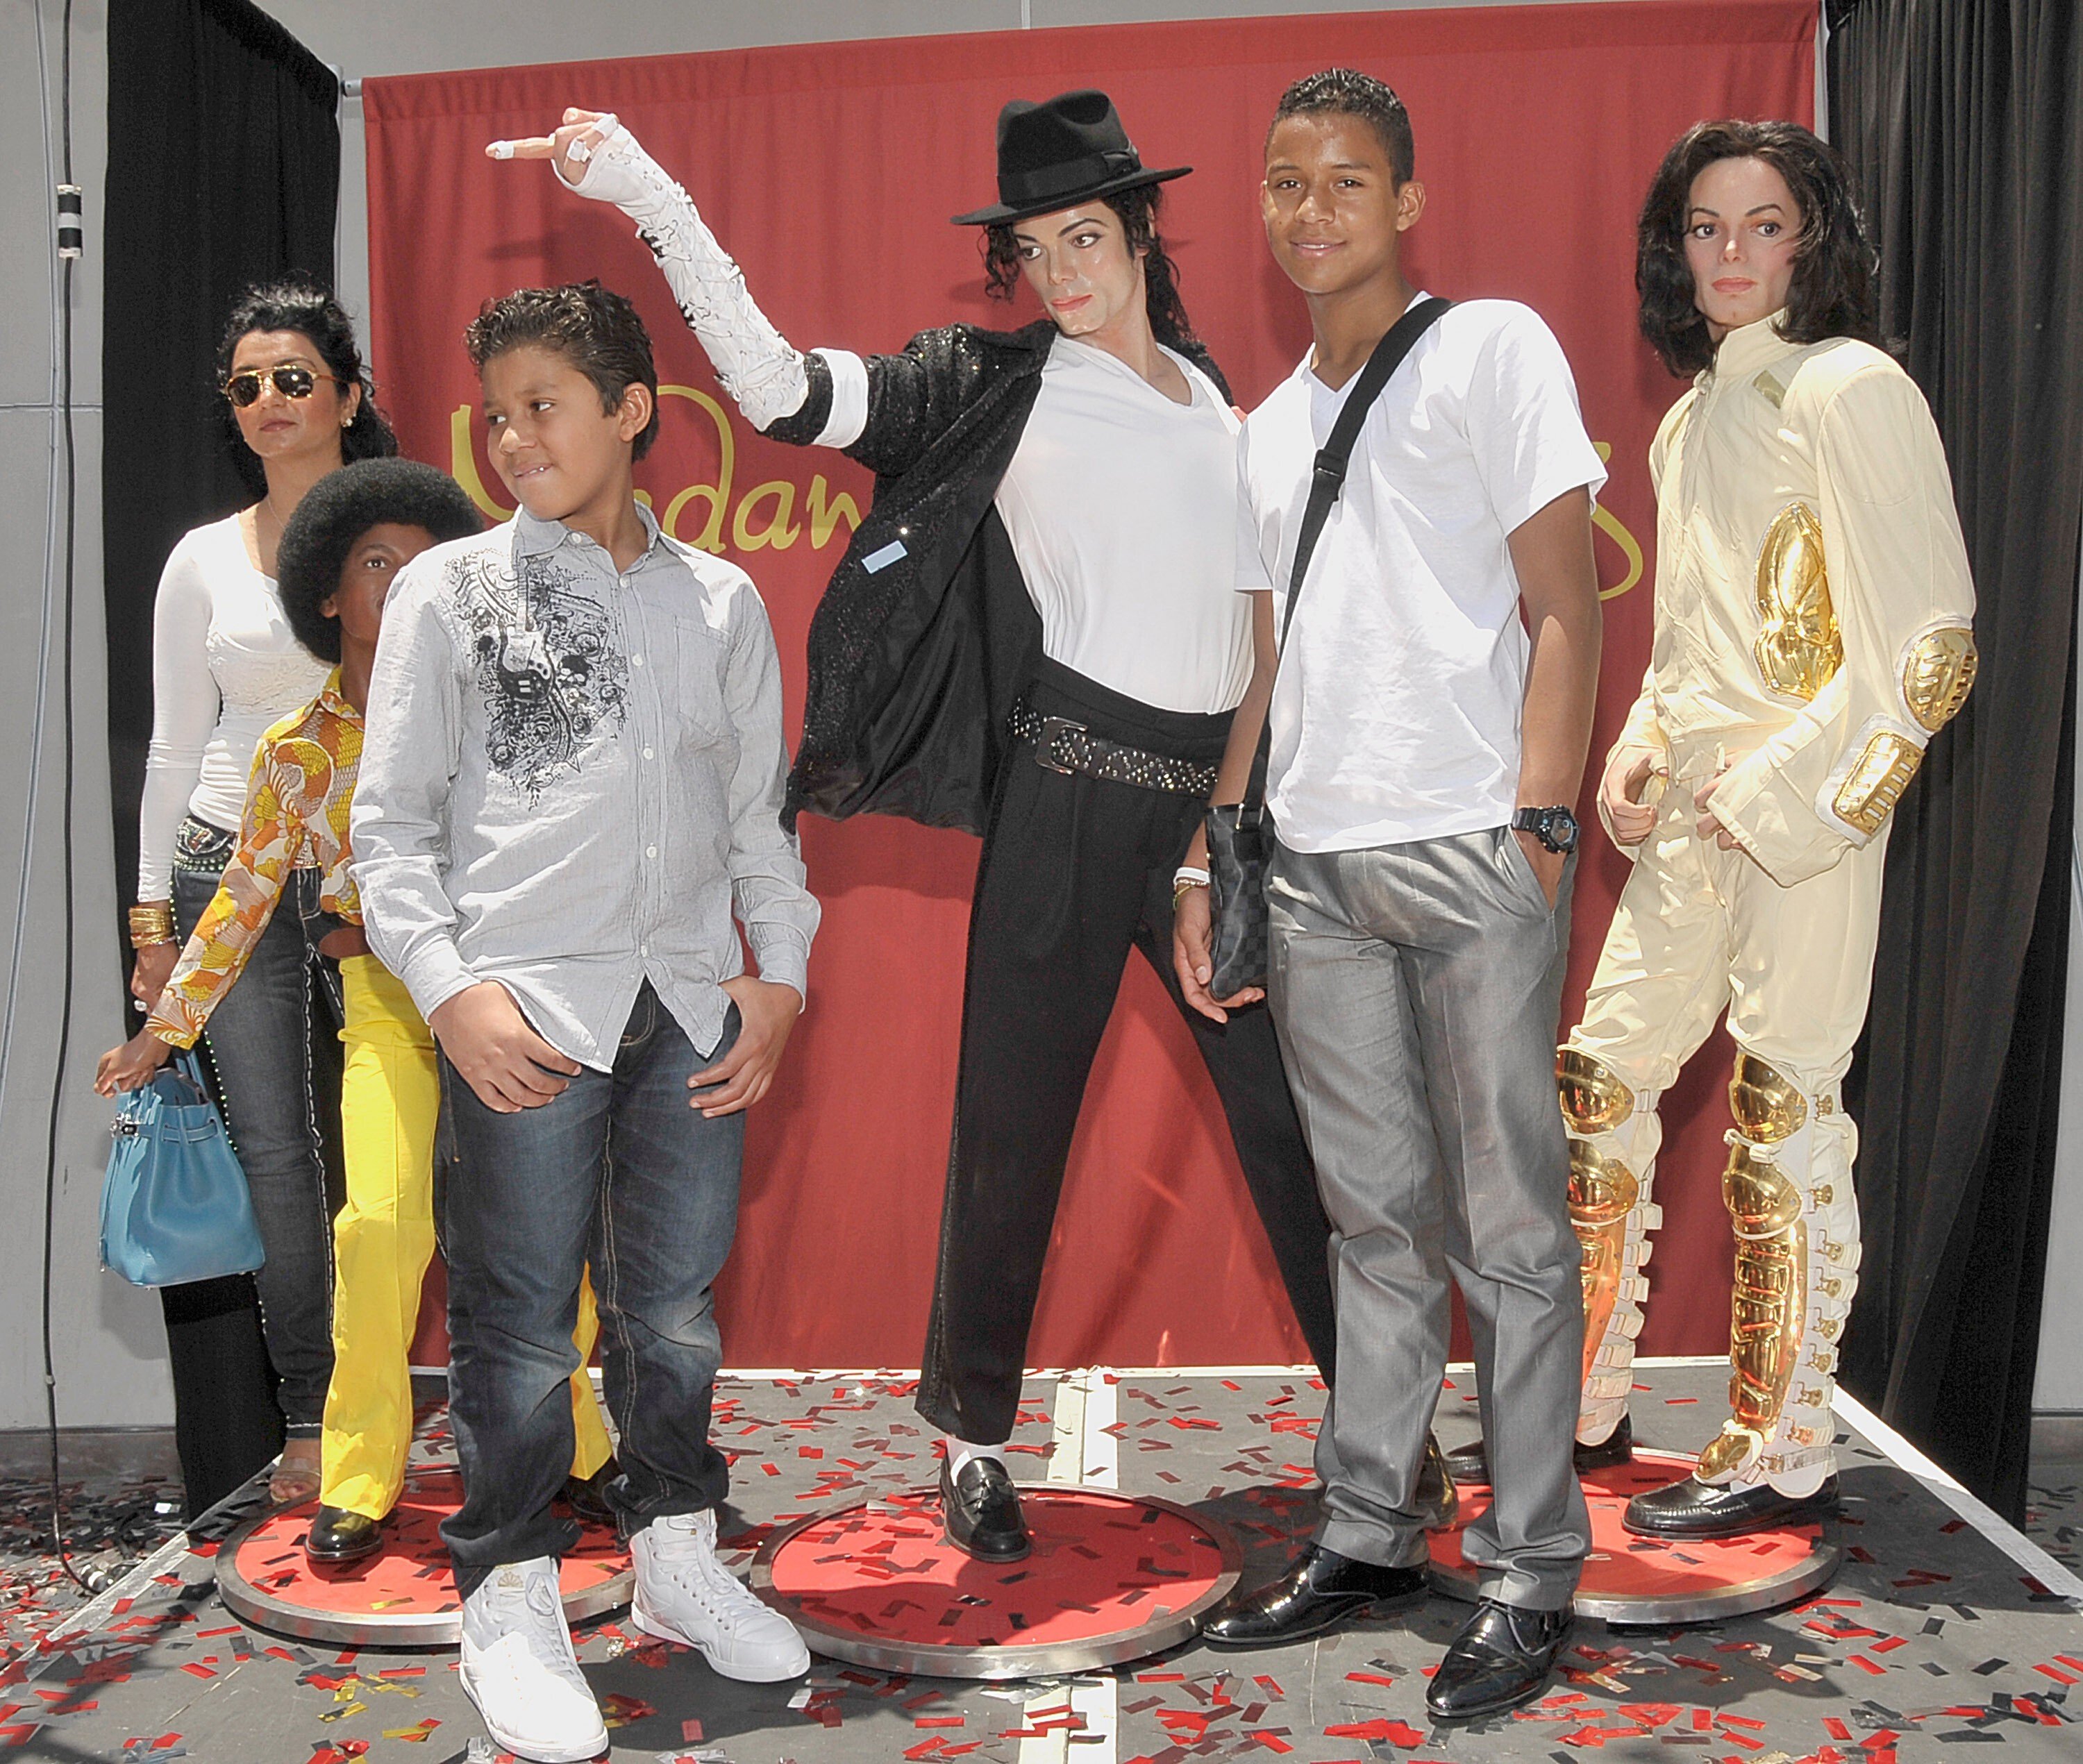 From left: Halima Jackson, Jermajesty Jackson and Jaafar Jackson at the Michael Jackson Experience at Madame Tussauds in 2011 in Hollywood, California. Photo: John M. Heller/Getty Images